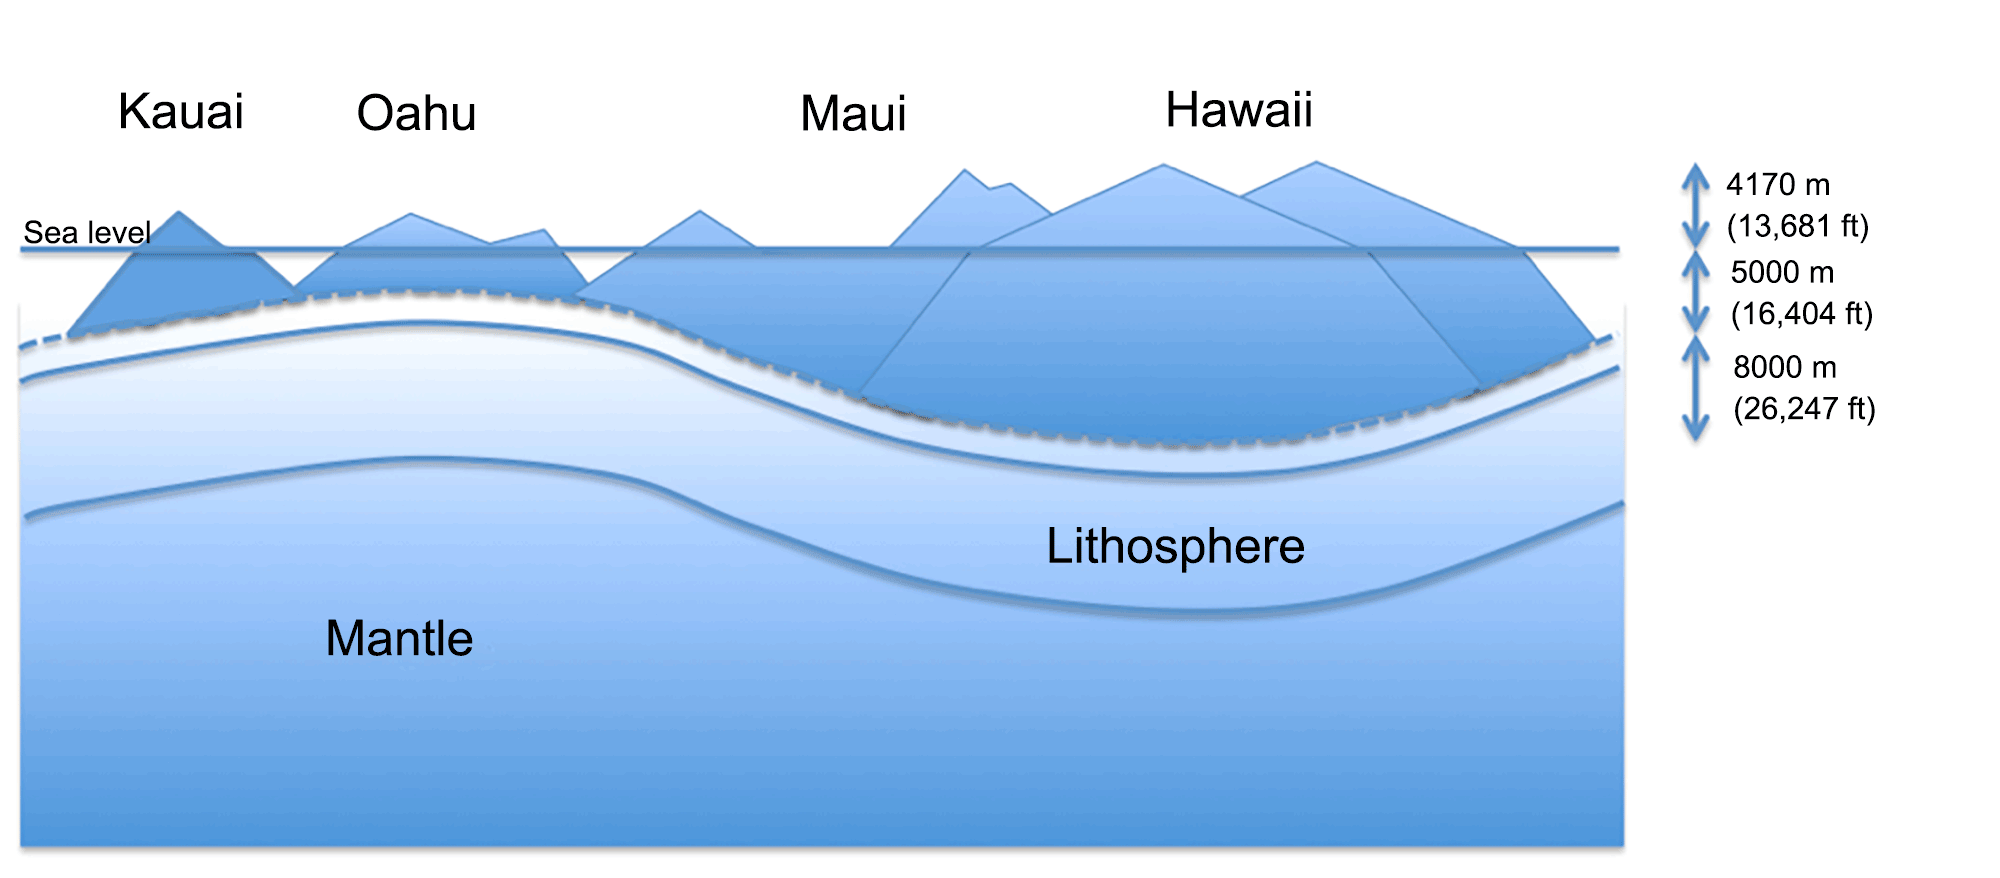 Diagram showing the heights of Hawaiian islands that incorporates their sizes below sea level.